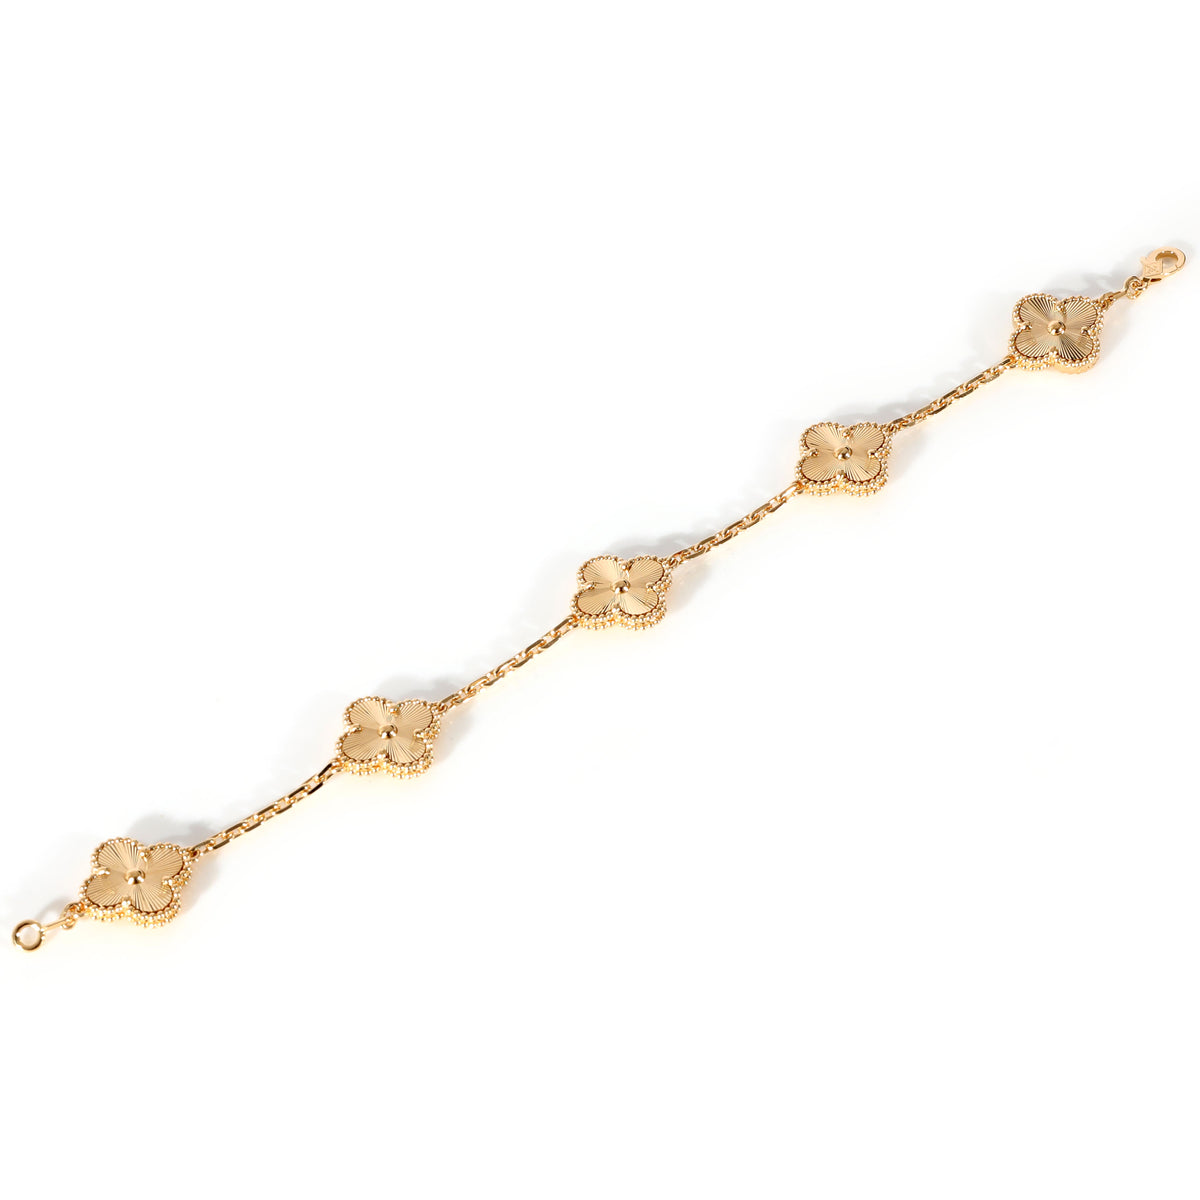 Van Cleef & Arpels - Authenticated Vintage Alhambra Bracelet - Yellow Gold Multicolour for Women, Very Good Condition